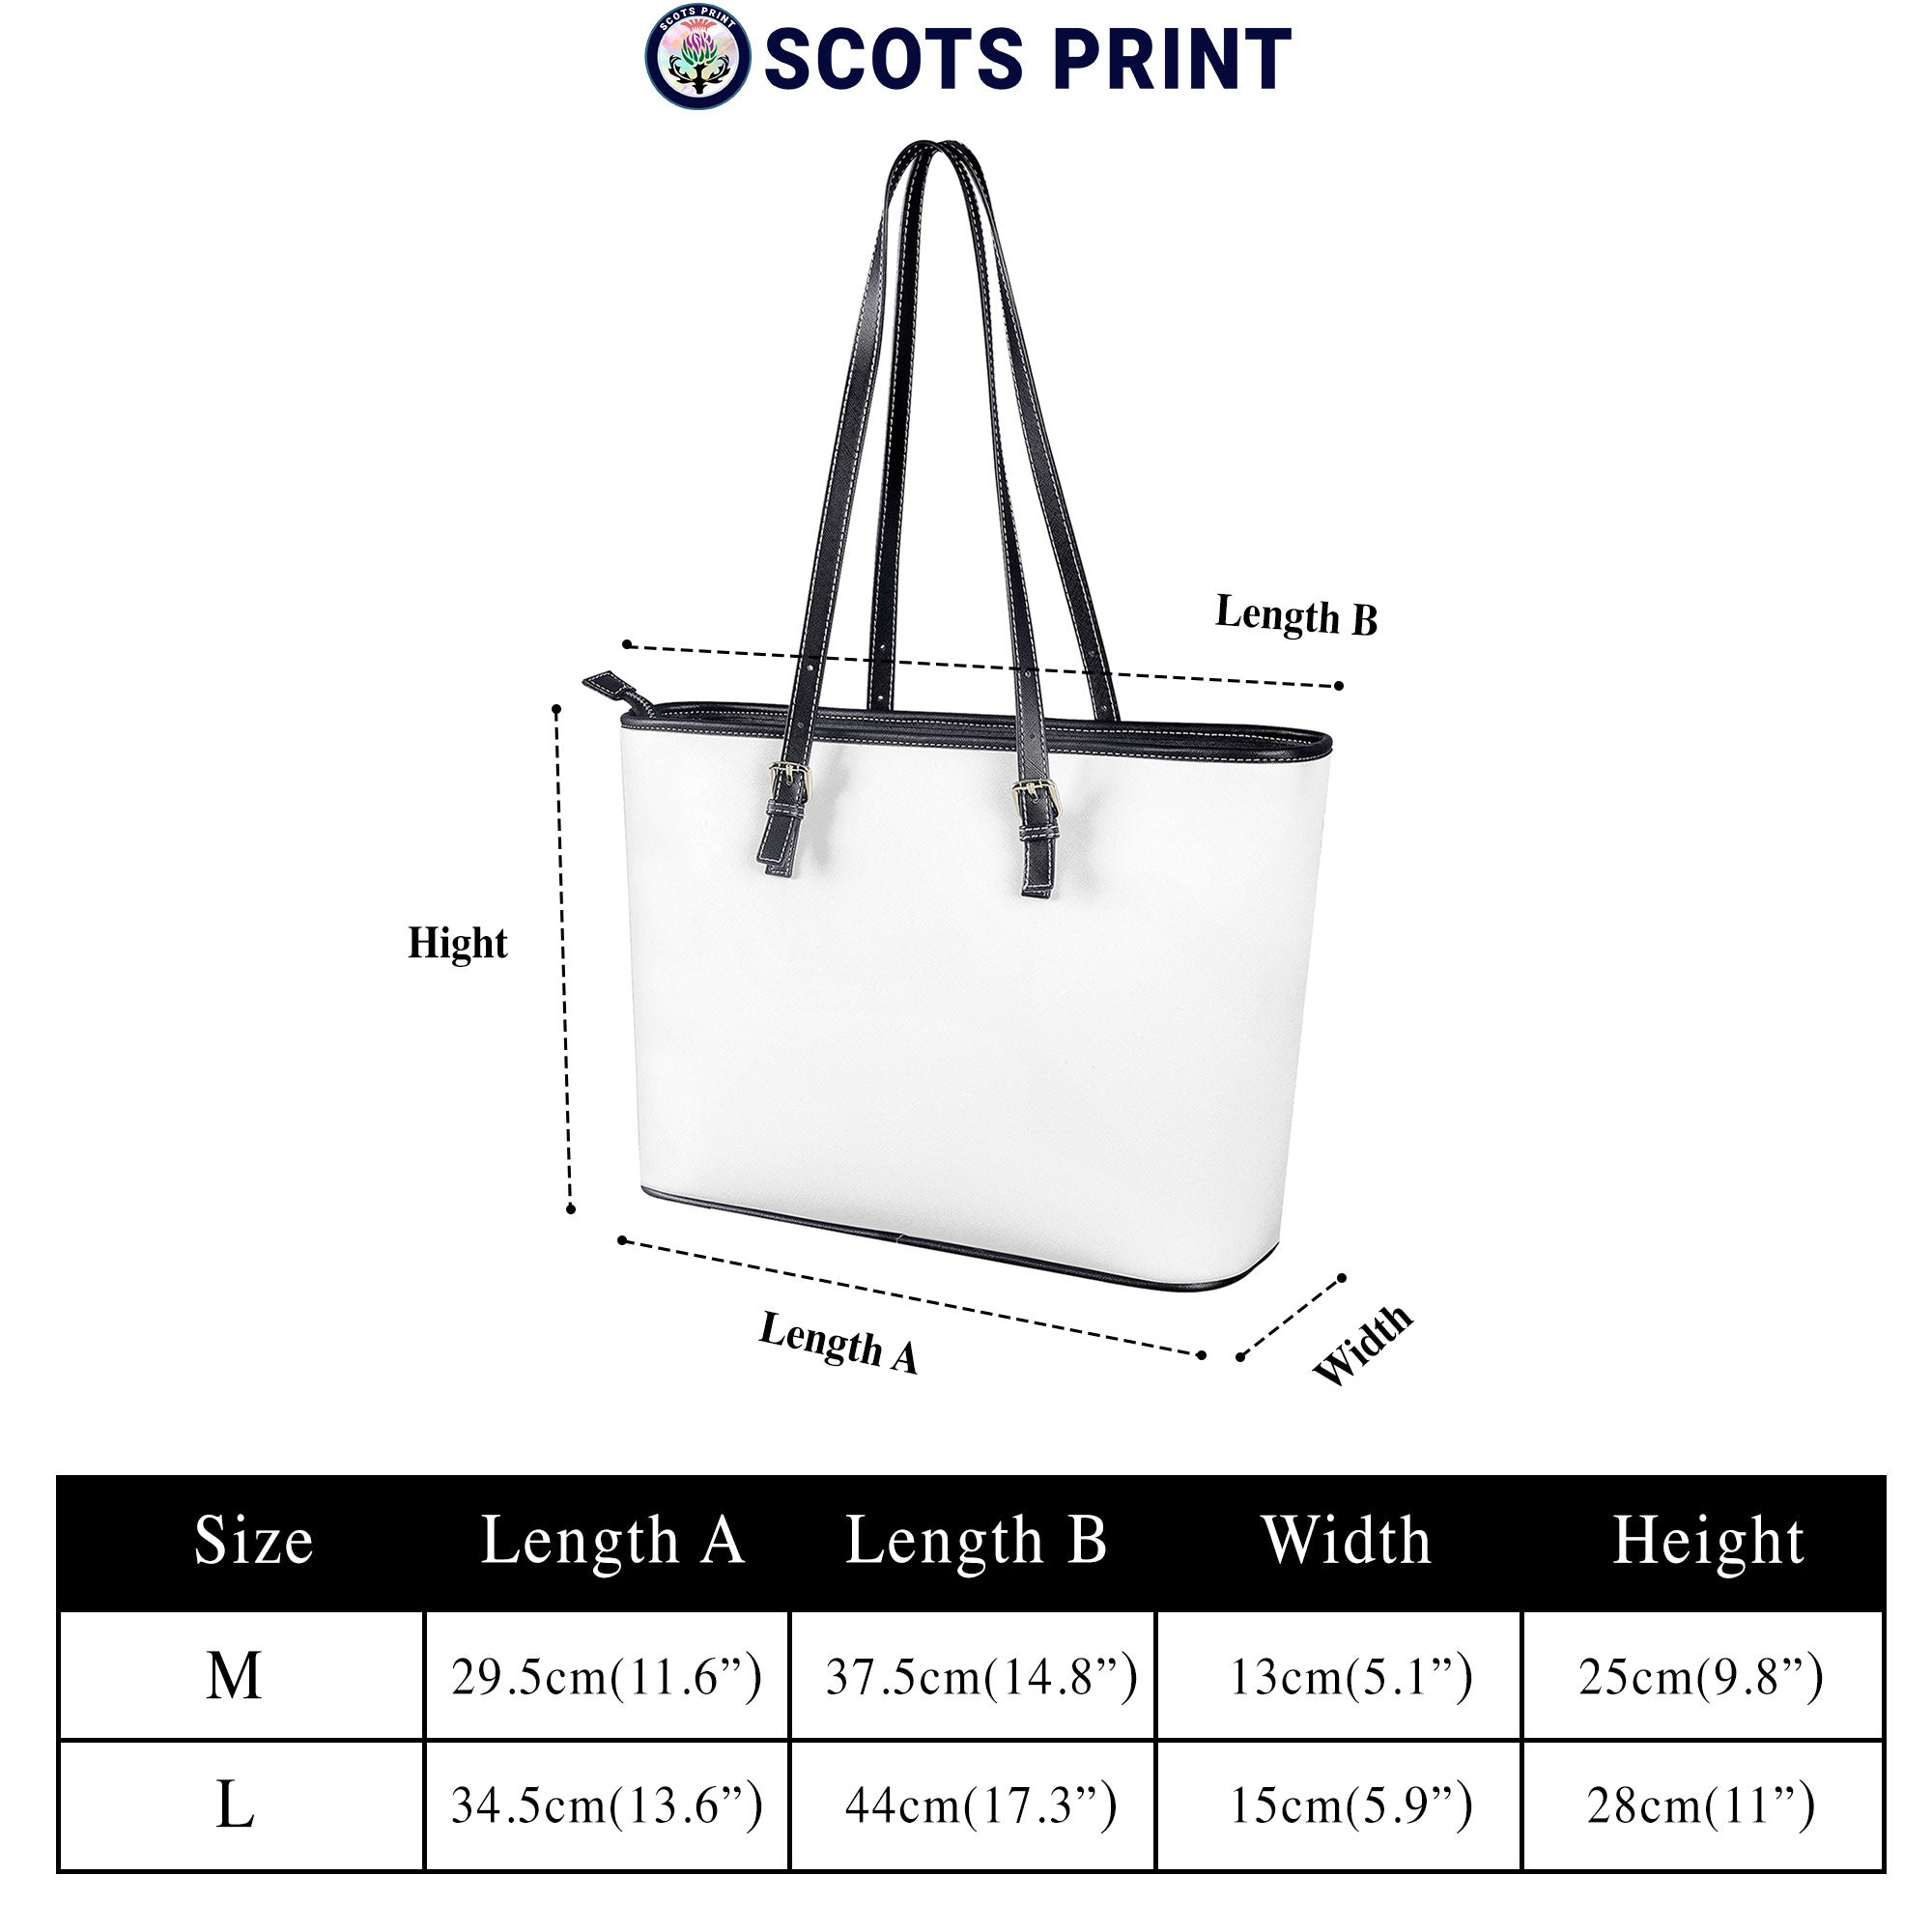 Ramsay Blue Ancient Tartan Crest Leather Tote Bag